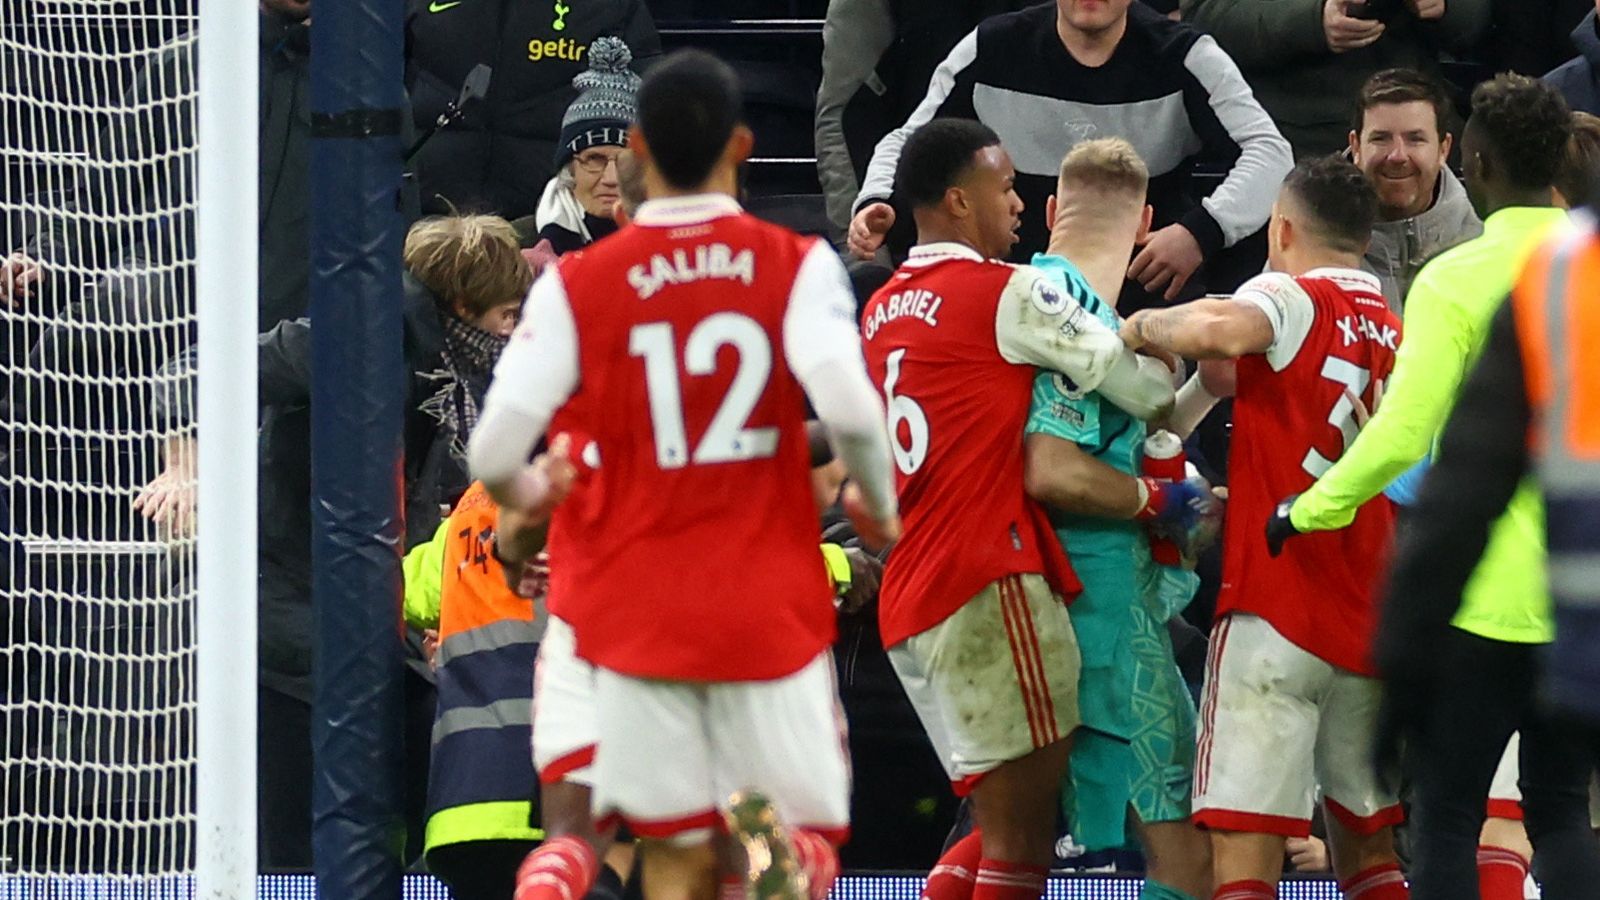 Aaron Ramsdale: FA condemns fan's attack on Arsenal goalkeeper after Spurs game